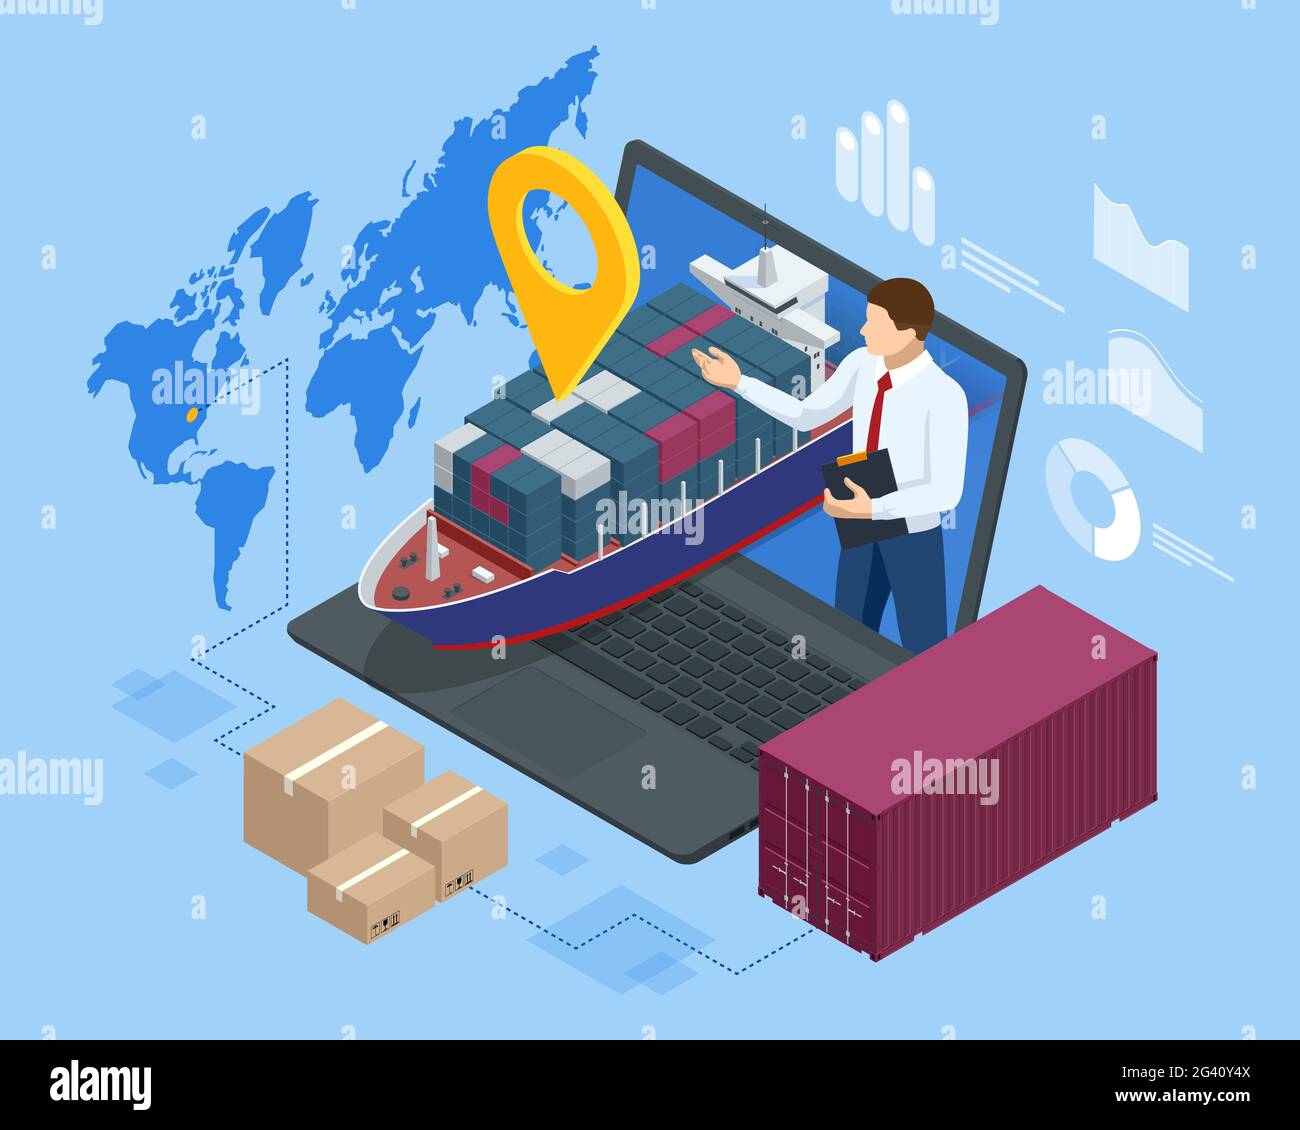 Isometric Logistics and Delivery Sea Freight. Freight Transportation, Shipping, Nautical Vessel, Container ship Stock Vector